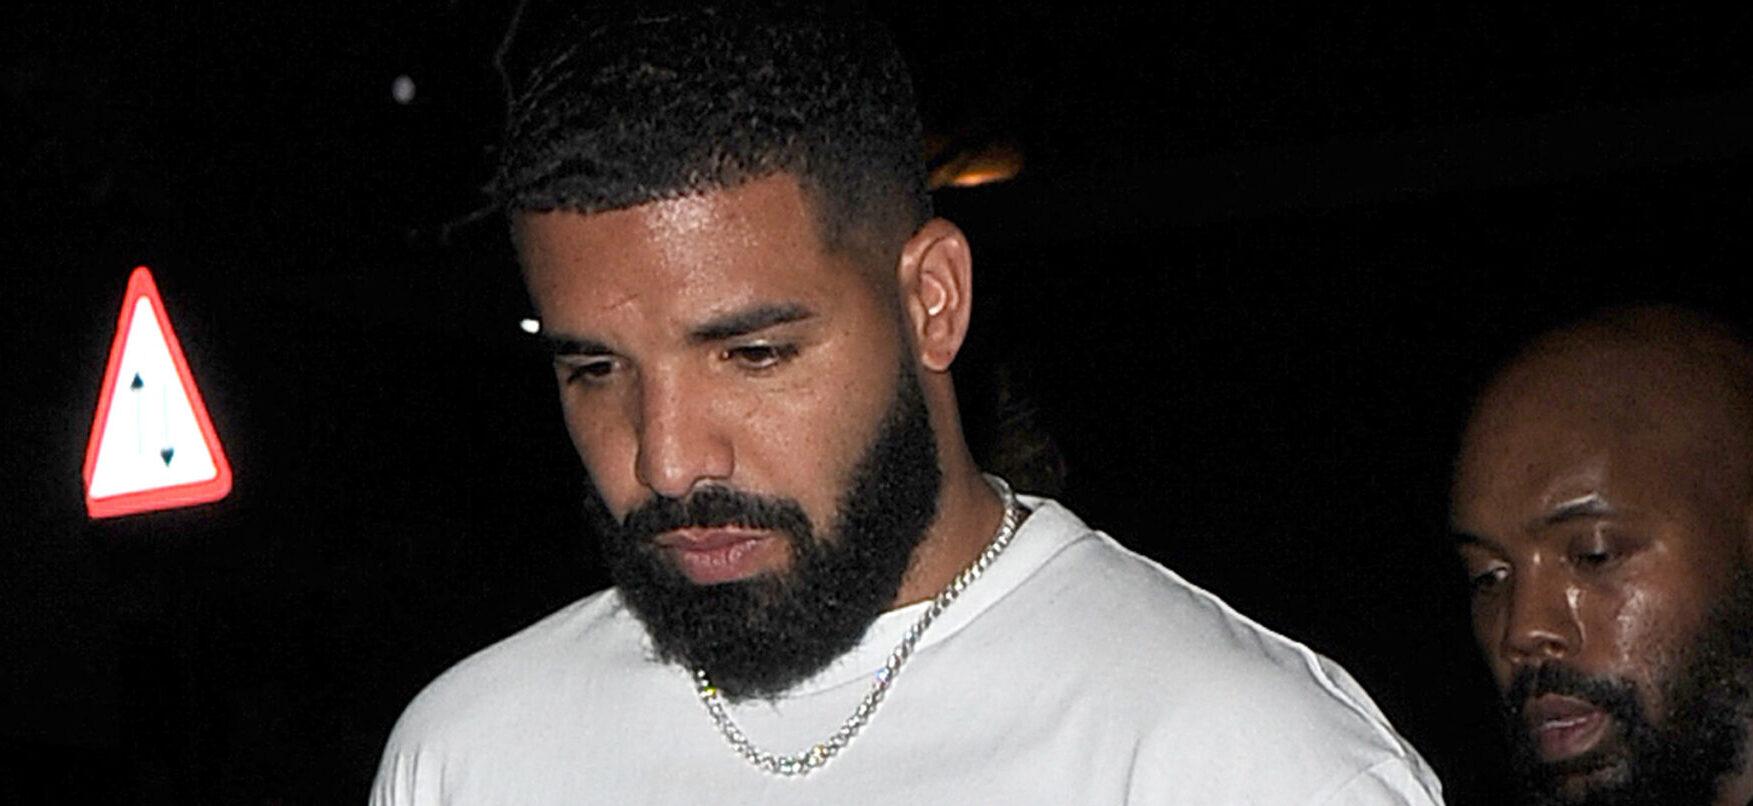 Drake Breaks Silence About Health Issues As He Takes Break From New Music